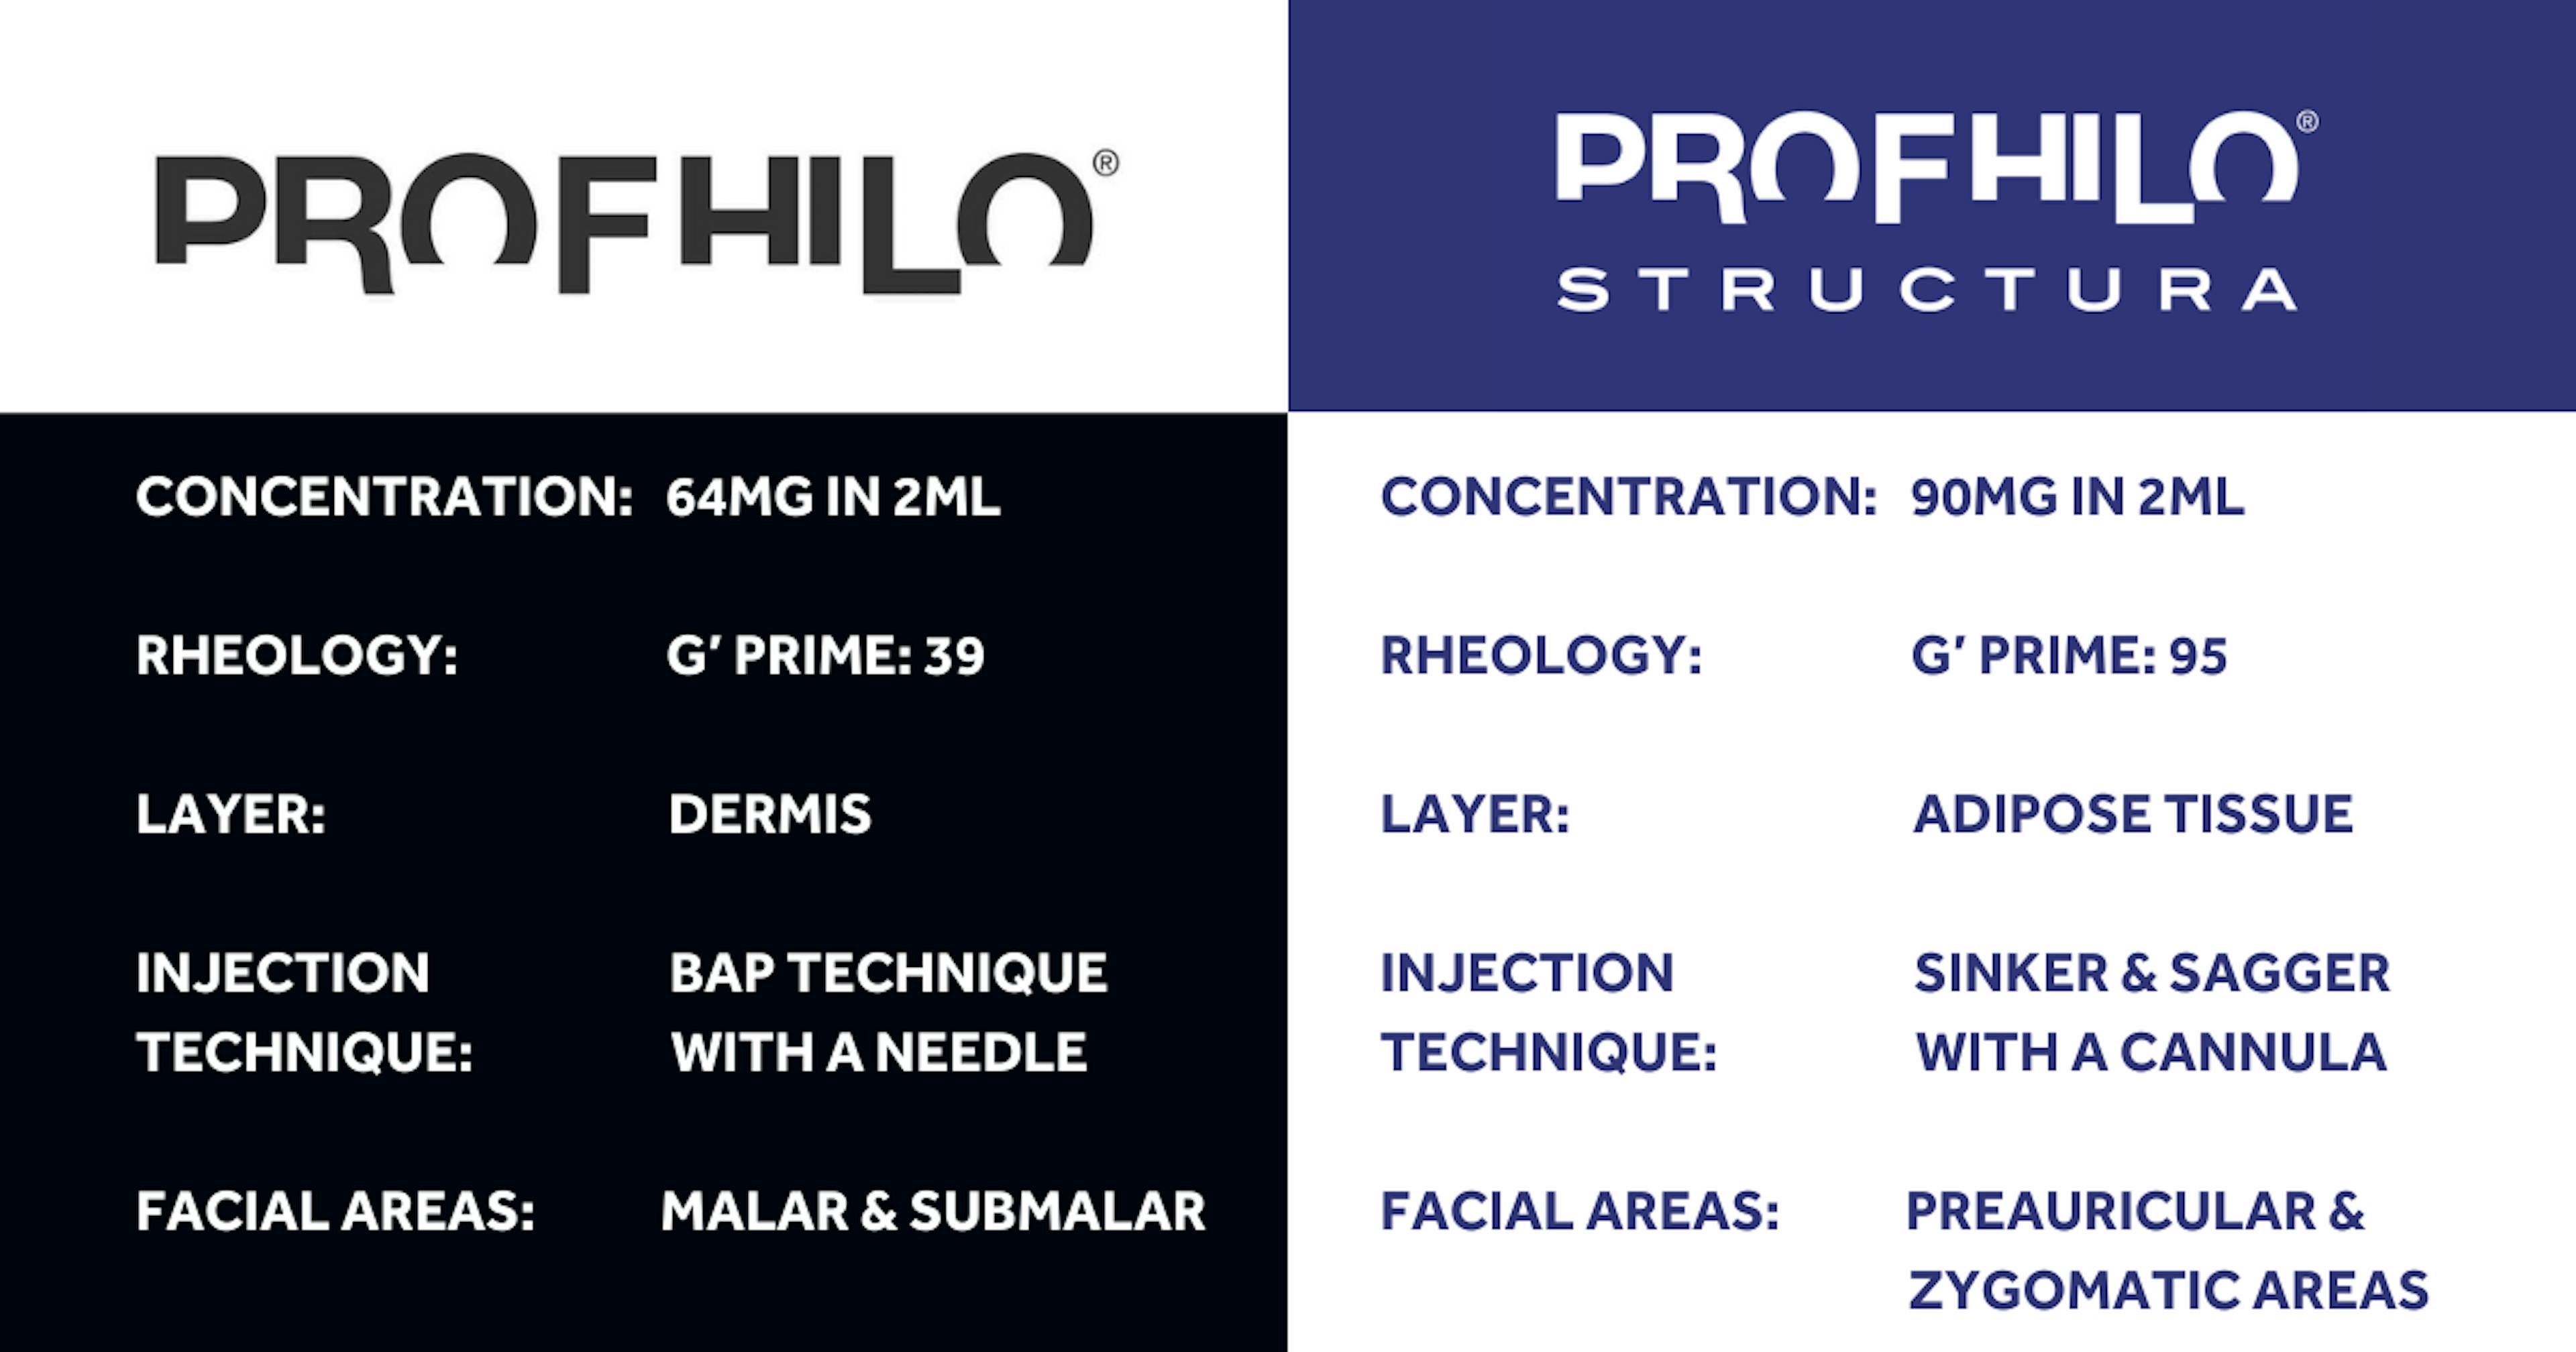 Diagram explaining the differences between Profhilo and Profhilo Structura injectables